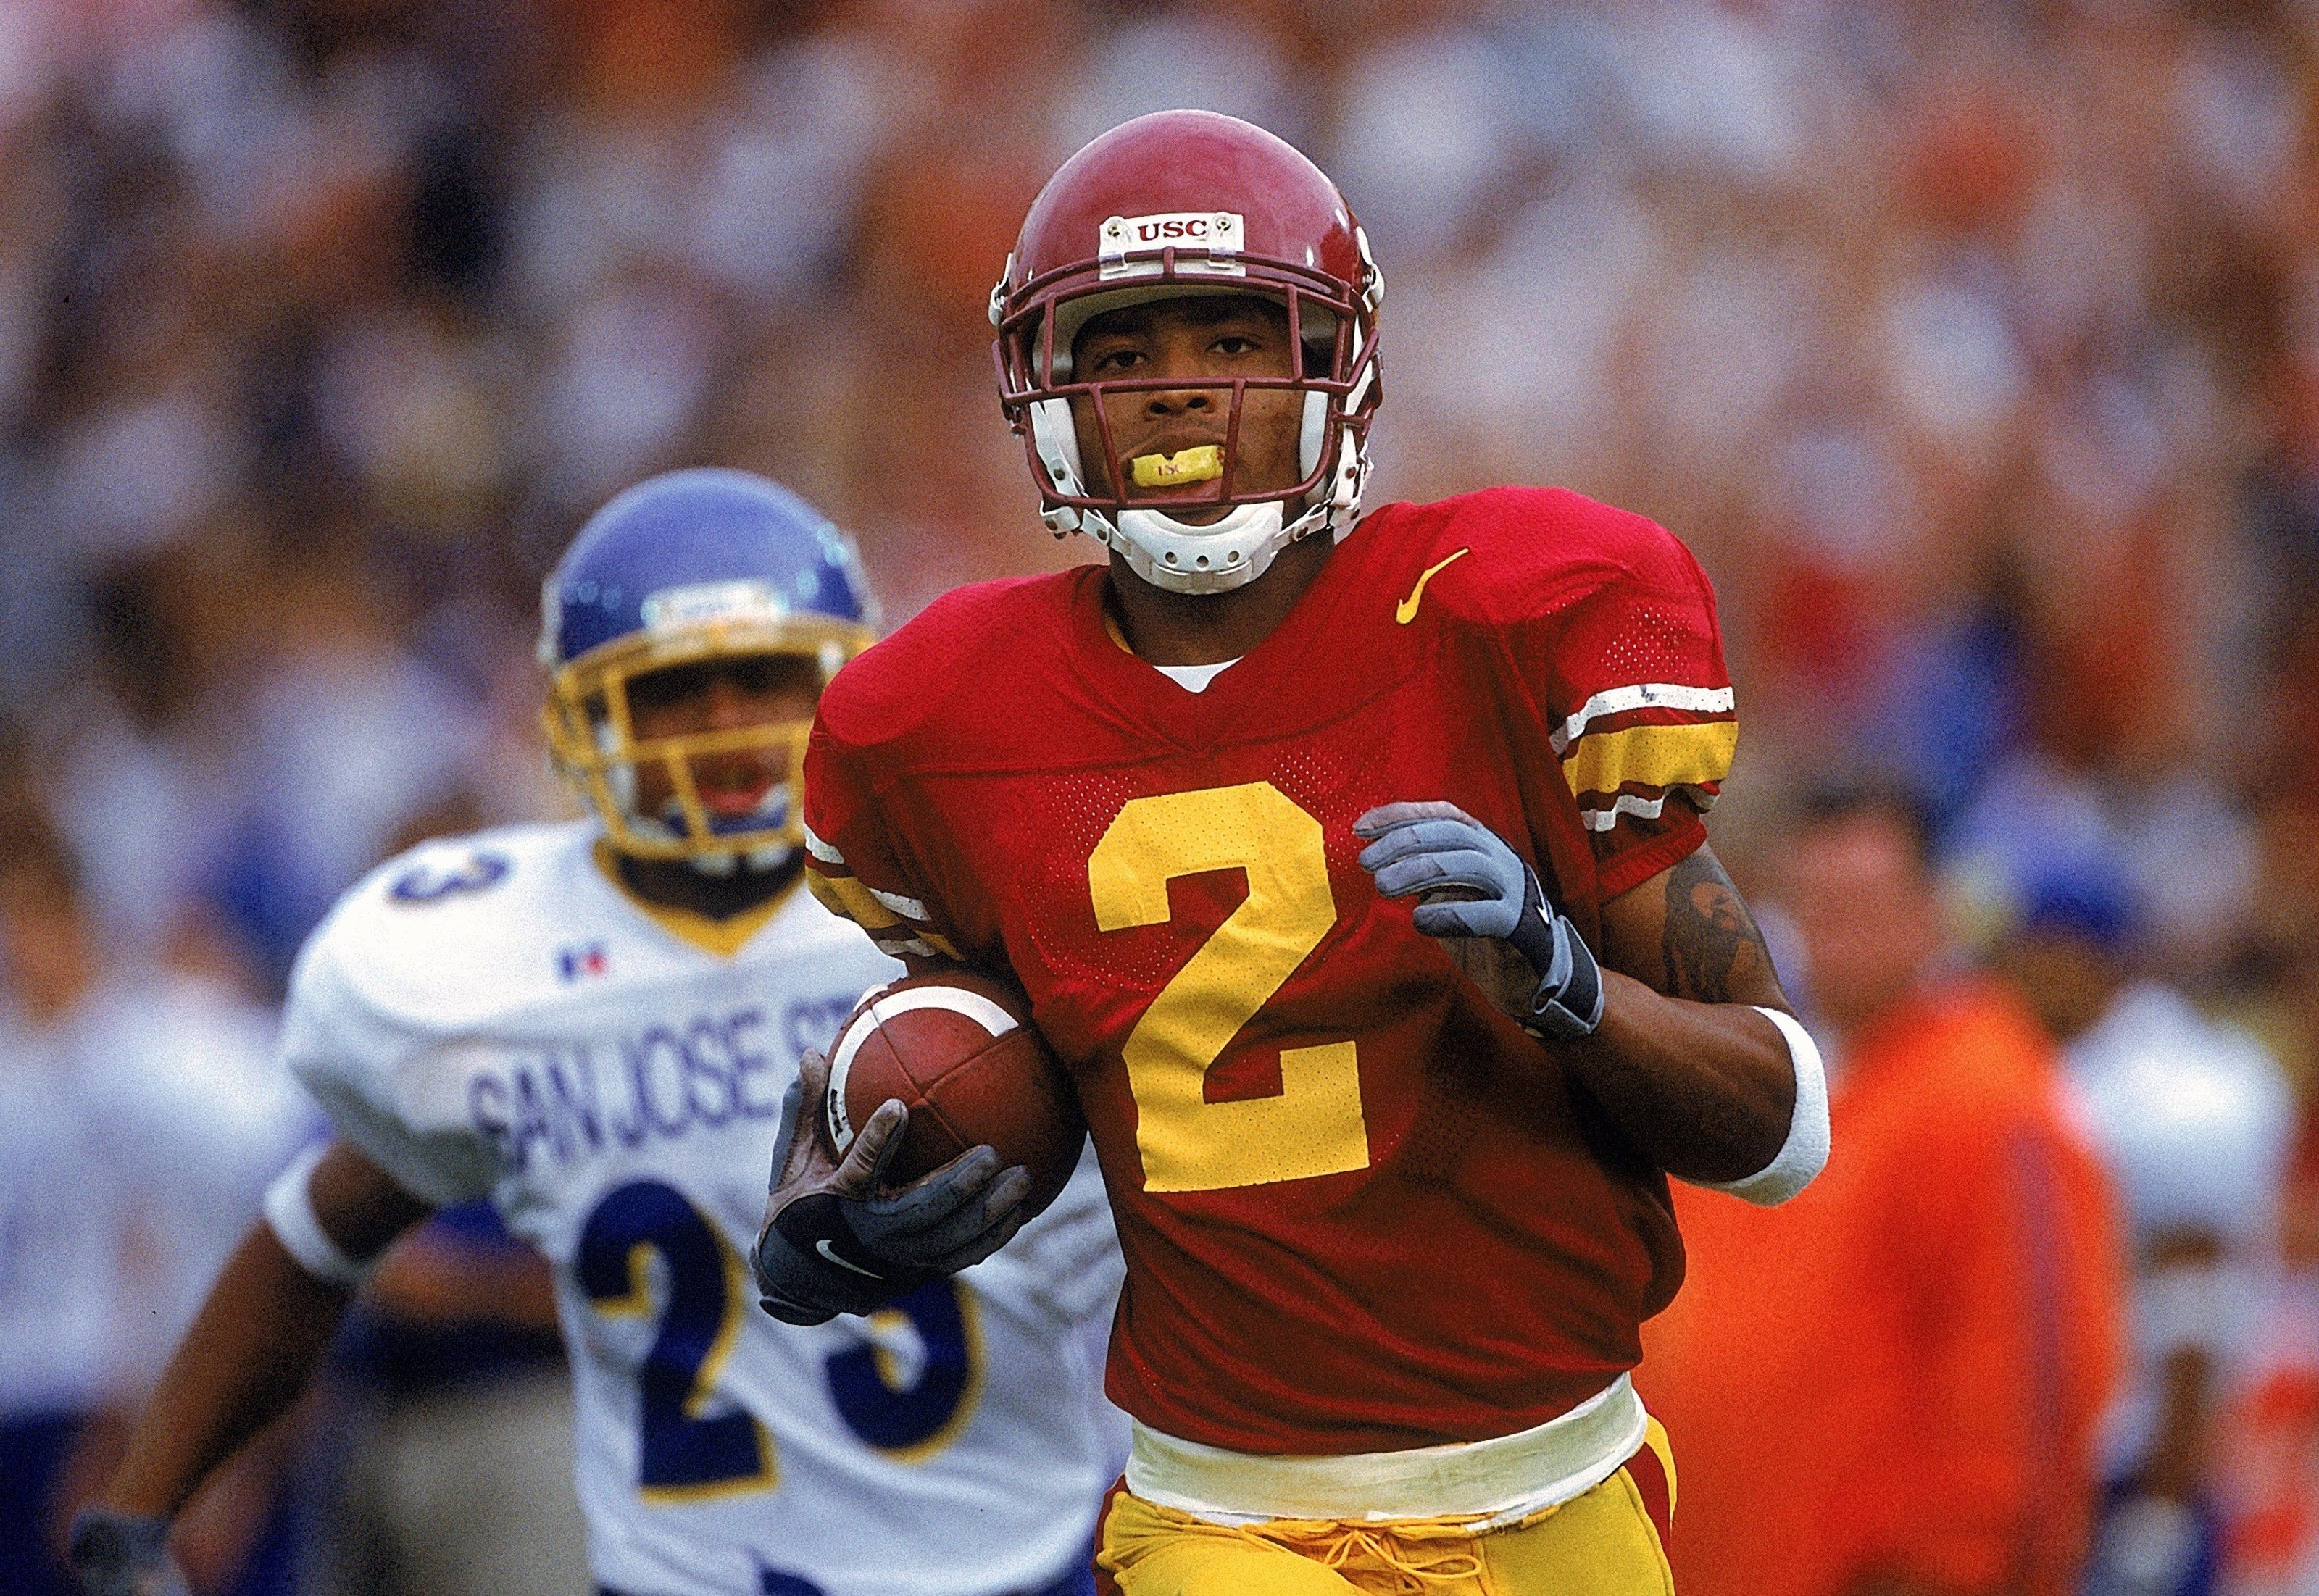 Ranking the 10 best USC wide receivers of all-time